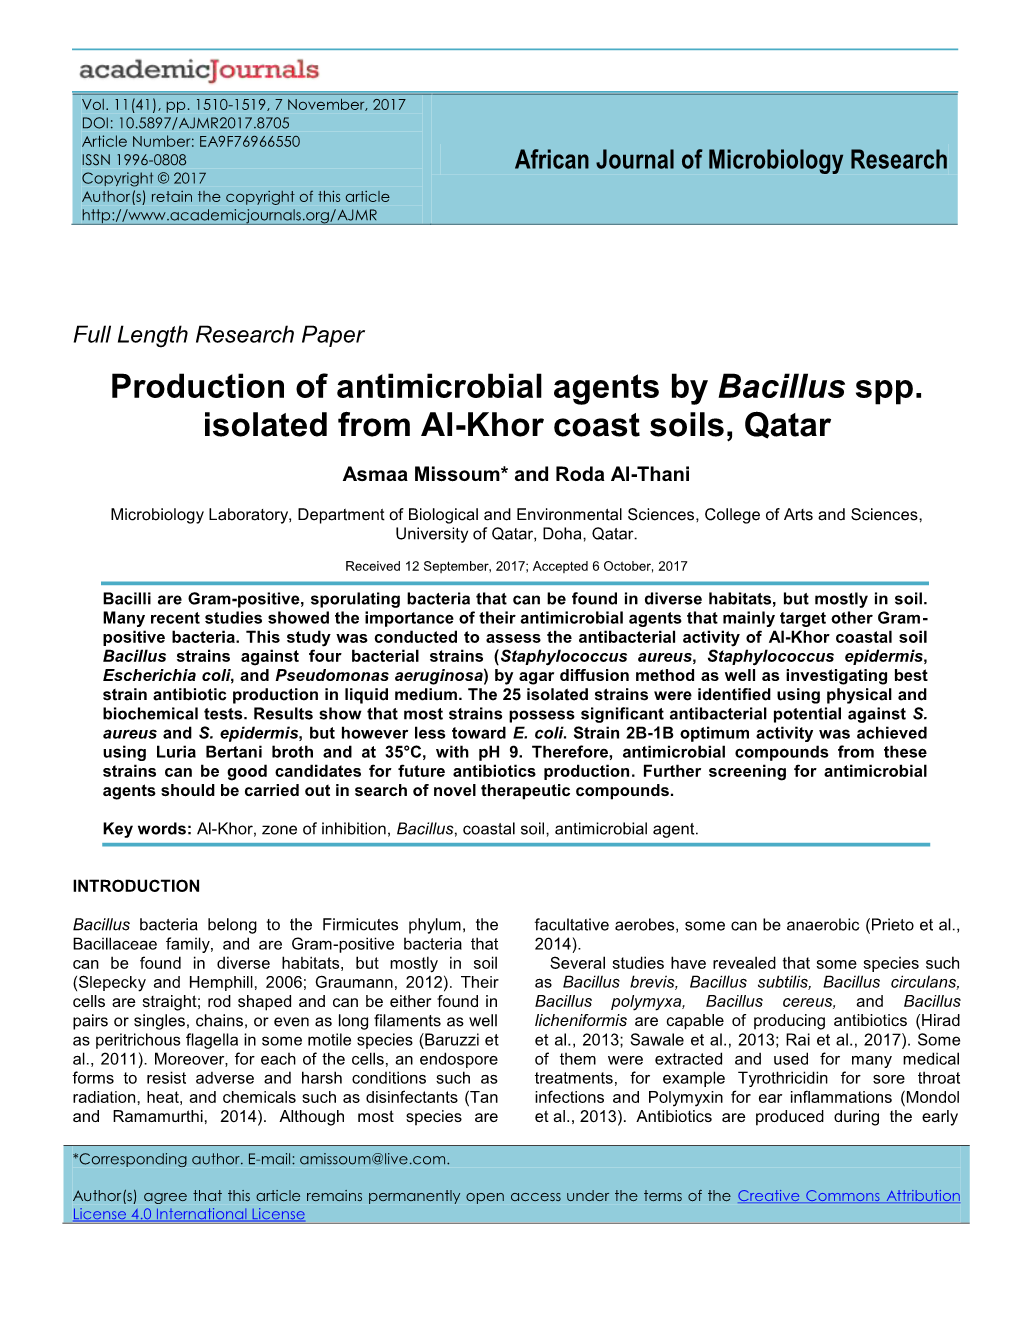 Production of Antimicrobial Agents by Bacillus Spp. Isolated from Al-Khor Coast Soils, Qatar